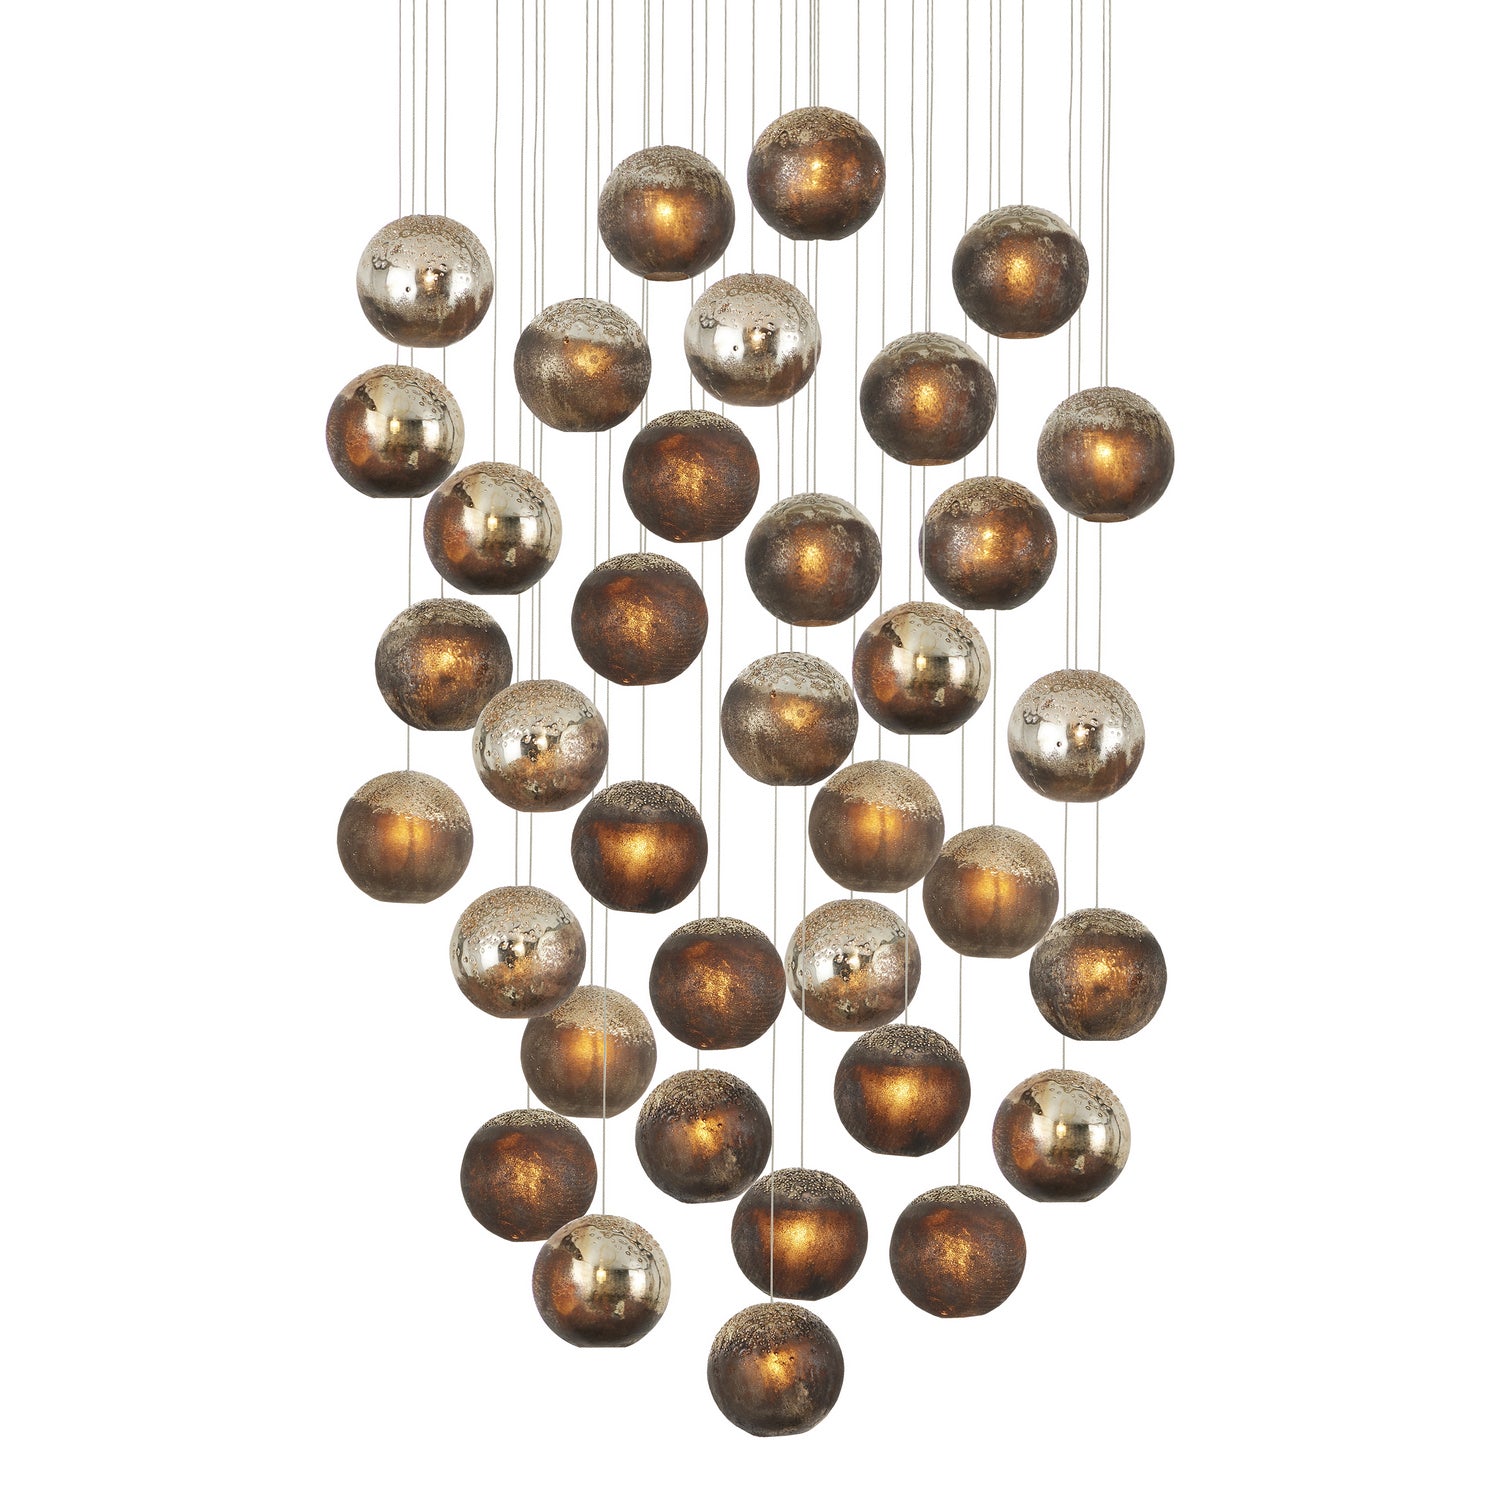 Currey and Company - 9000-1018 - 36 Light Pendant - Pathos - Antique Silver/Antique Gold/Matte Charcoal/Silver